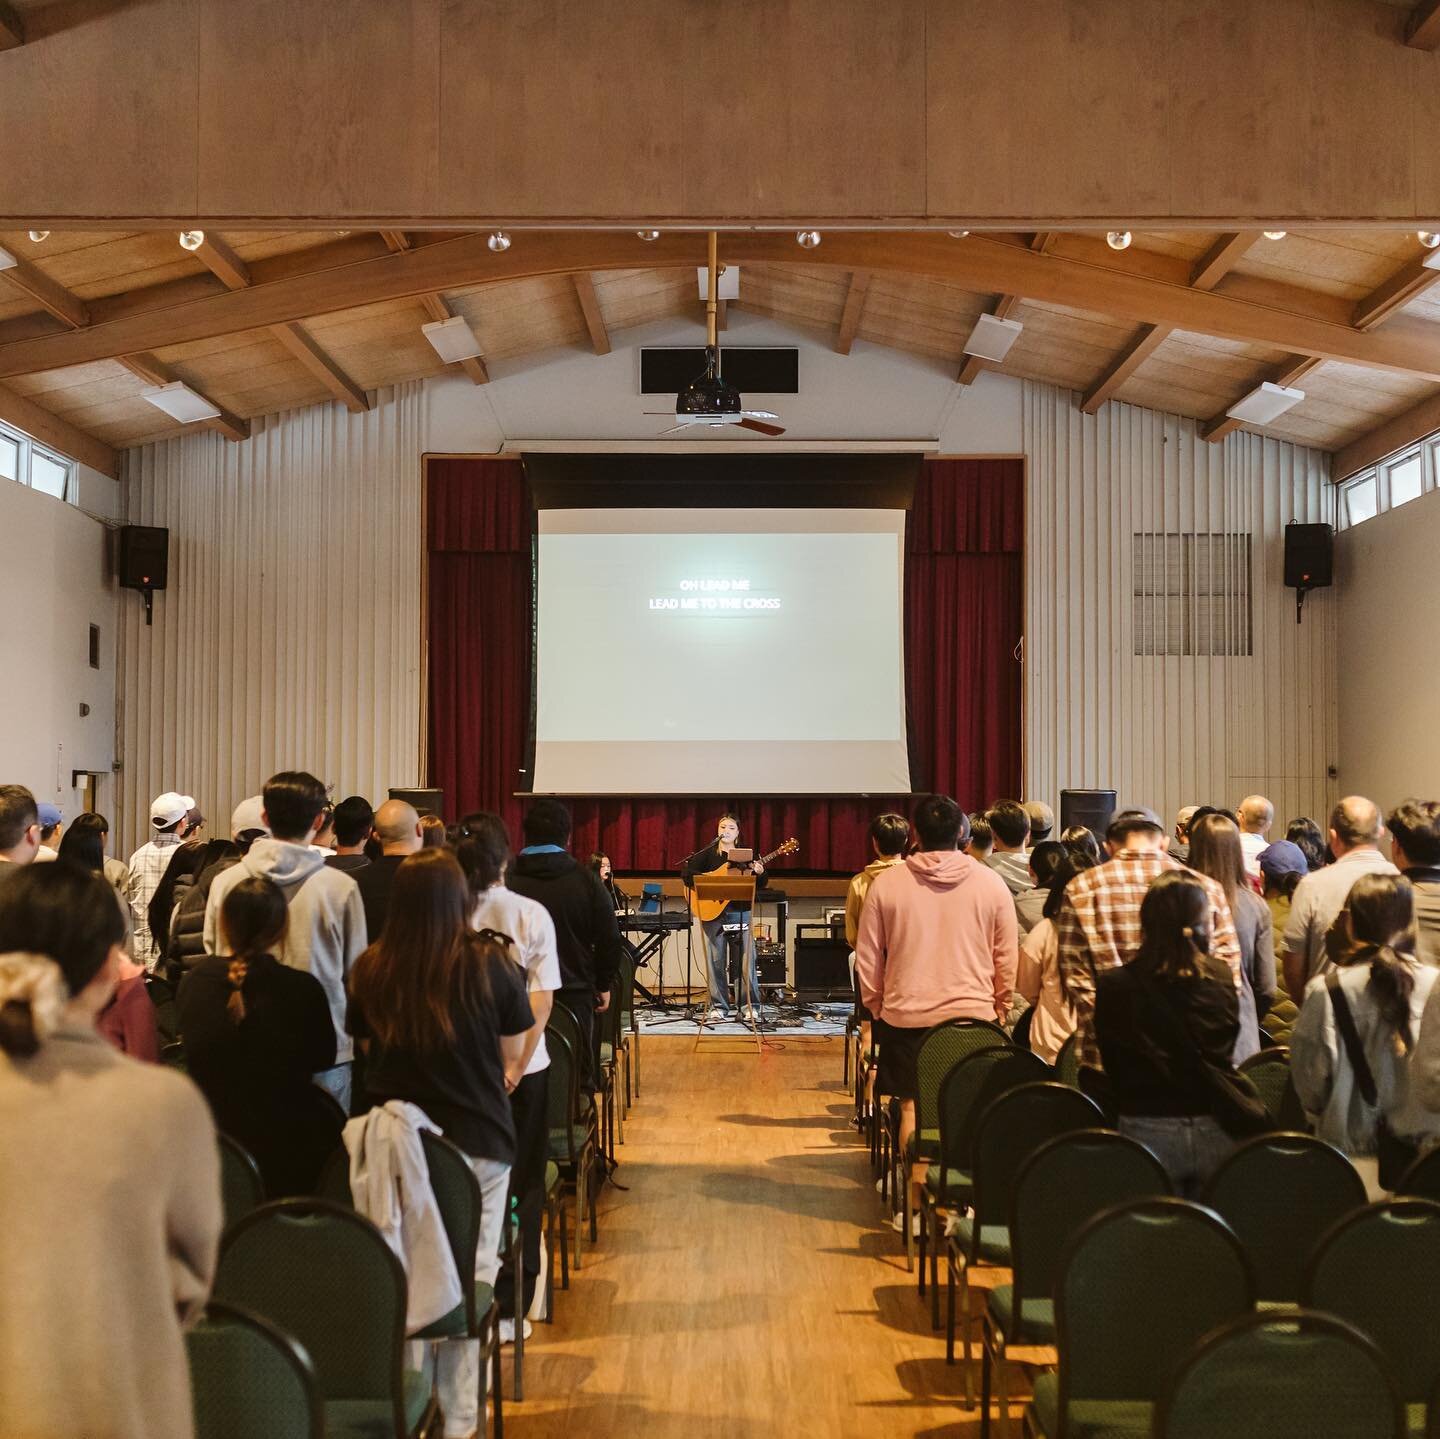 Thank you for joining us this past Good Friday and Easter Sunday! As one church, we spent this time to see Christ at the cross and celebrate the hope we have in His resurrection. Special thanks to all of our faithful volunteers who helped this past w